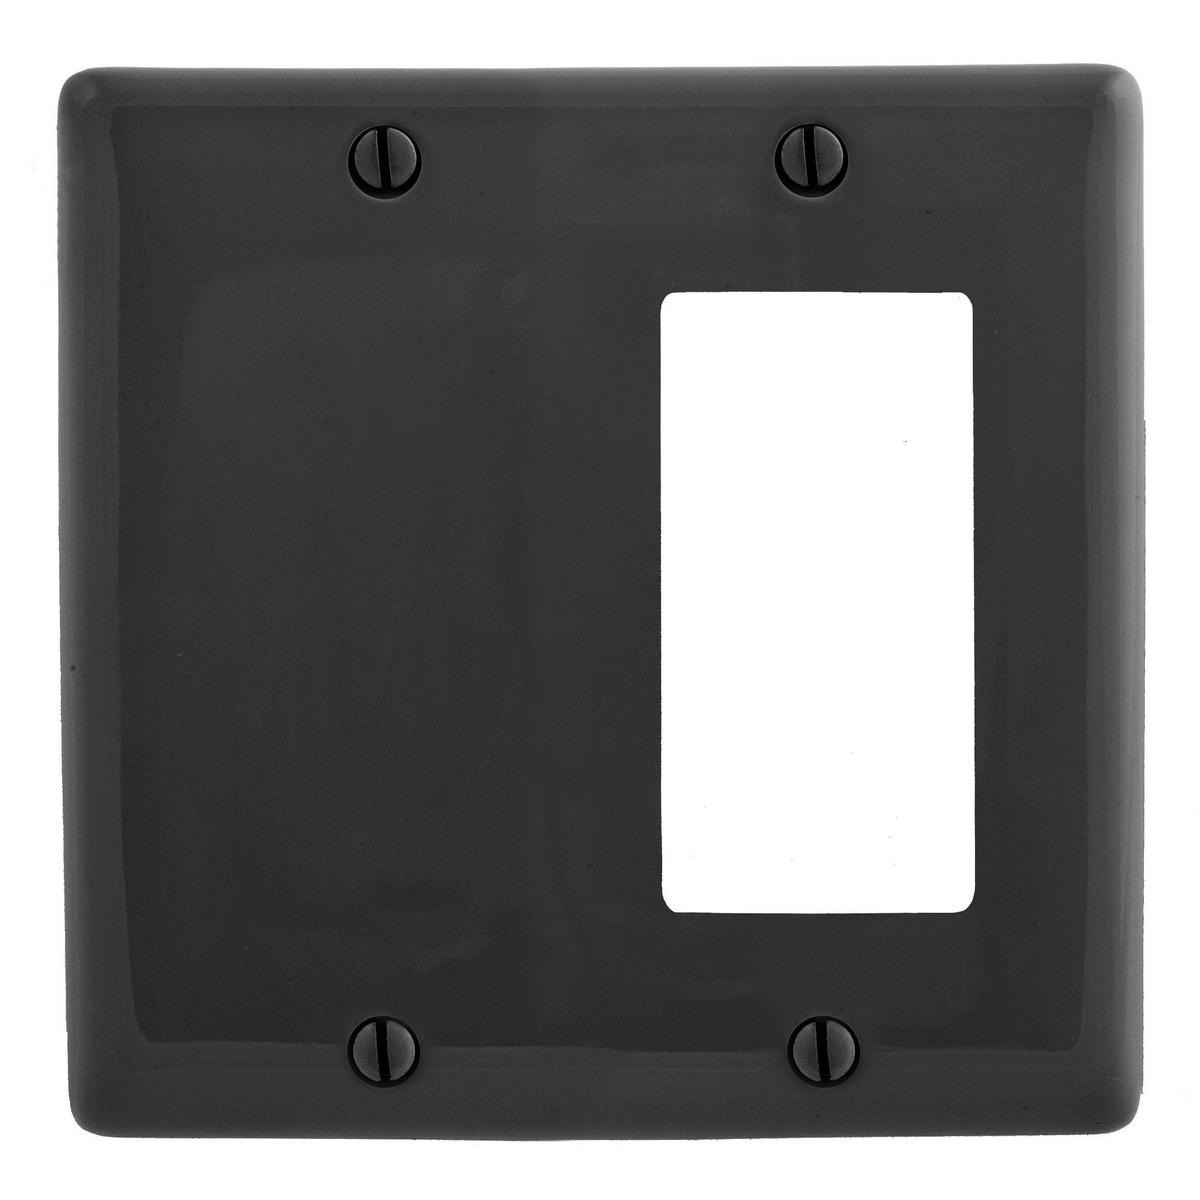 Hubbell NP1326BK Wallplates, Nylon, 2-Gang, 1) Decorator, 1) Blank, Black  ; Reinforcement ribs for extra strength ; High-impact, self-extinguishing nylon material ; Captive screw feature holds mounting screw in place ; Standard Size is 1/8" larger to give you extra cover